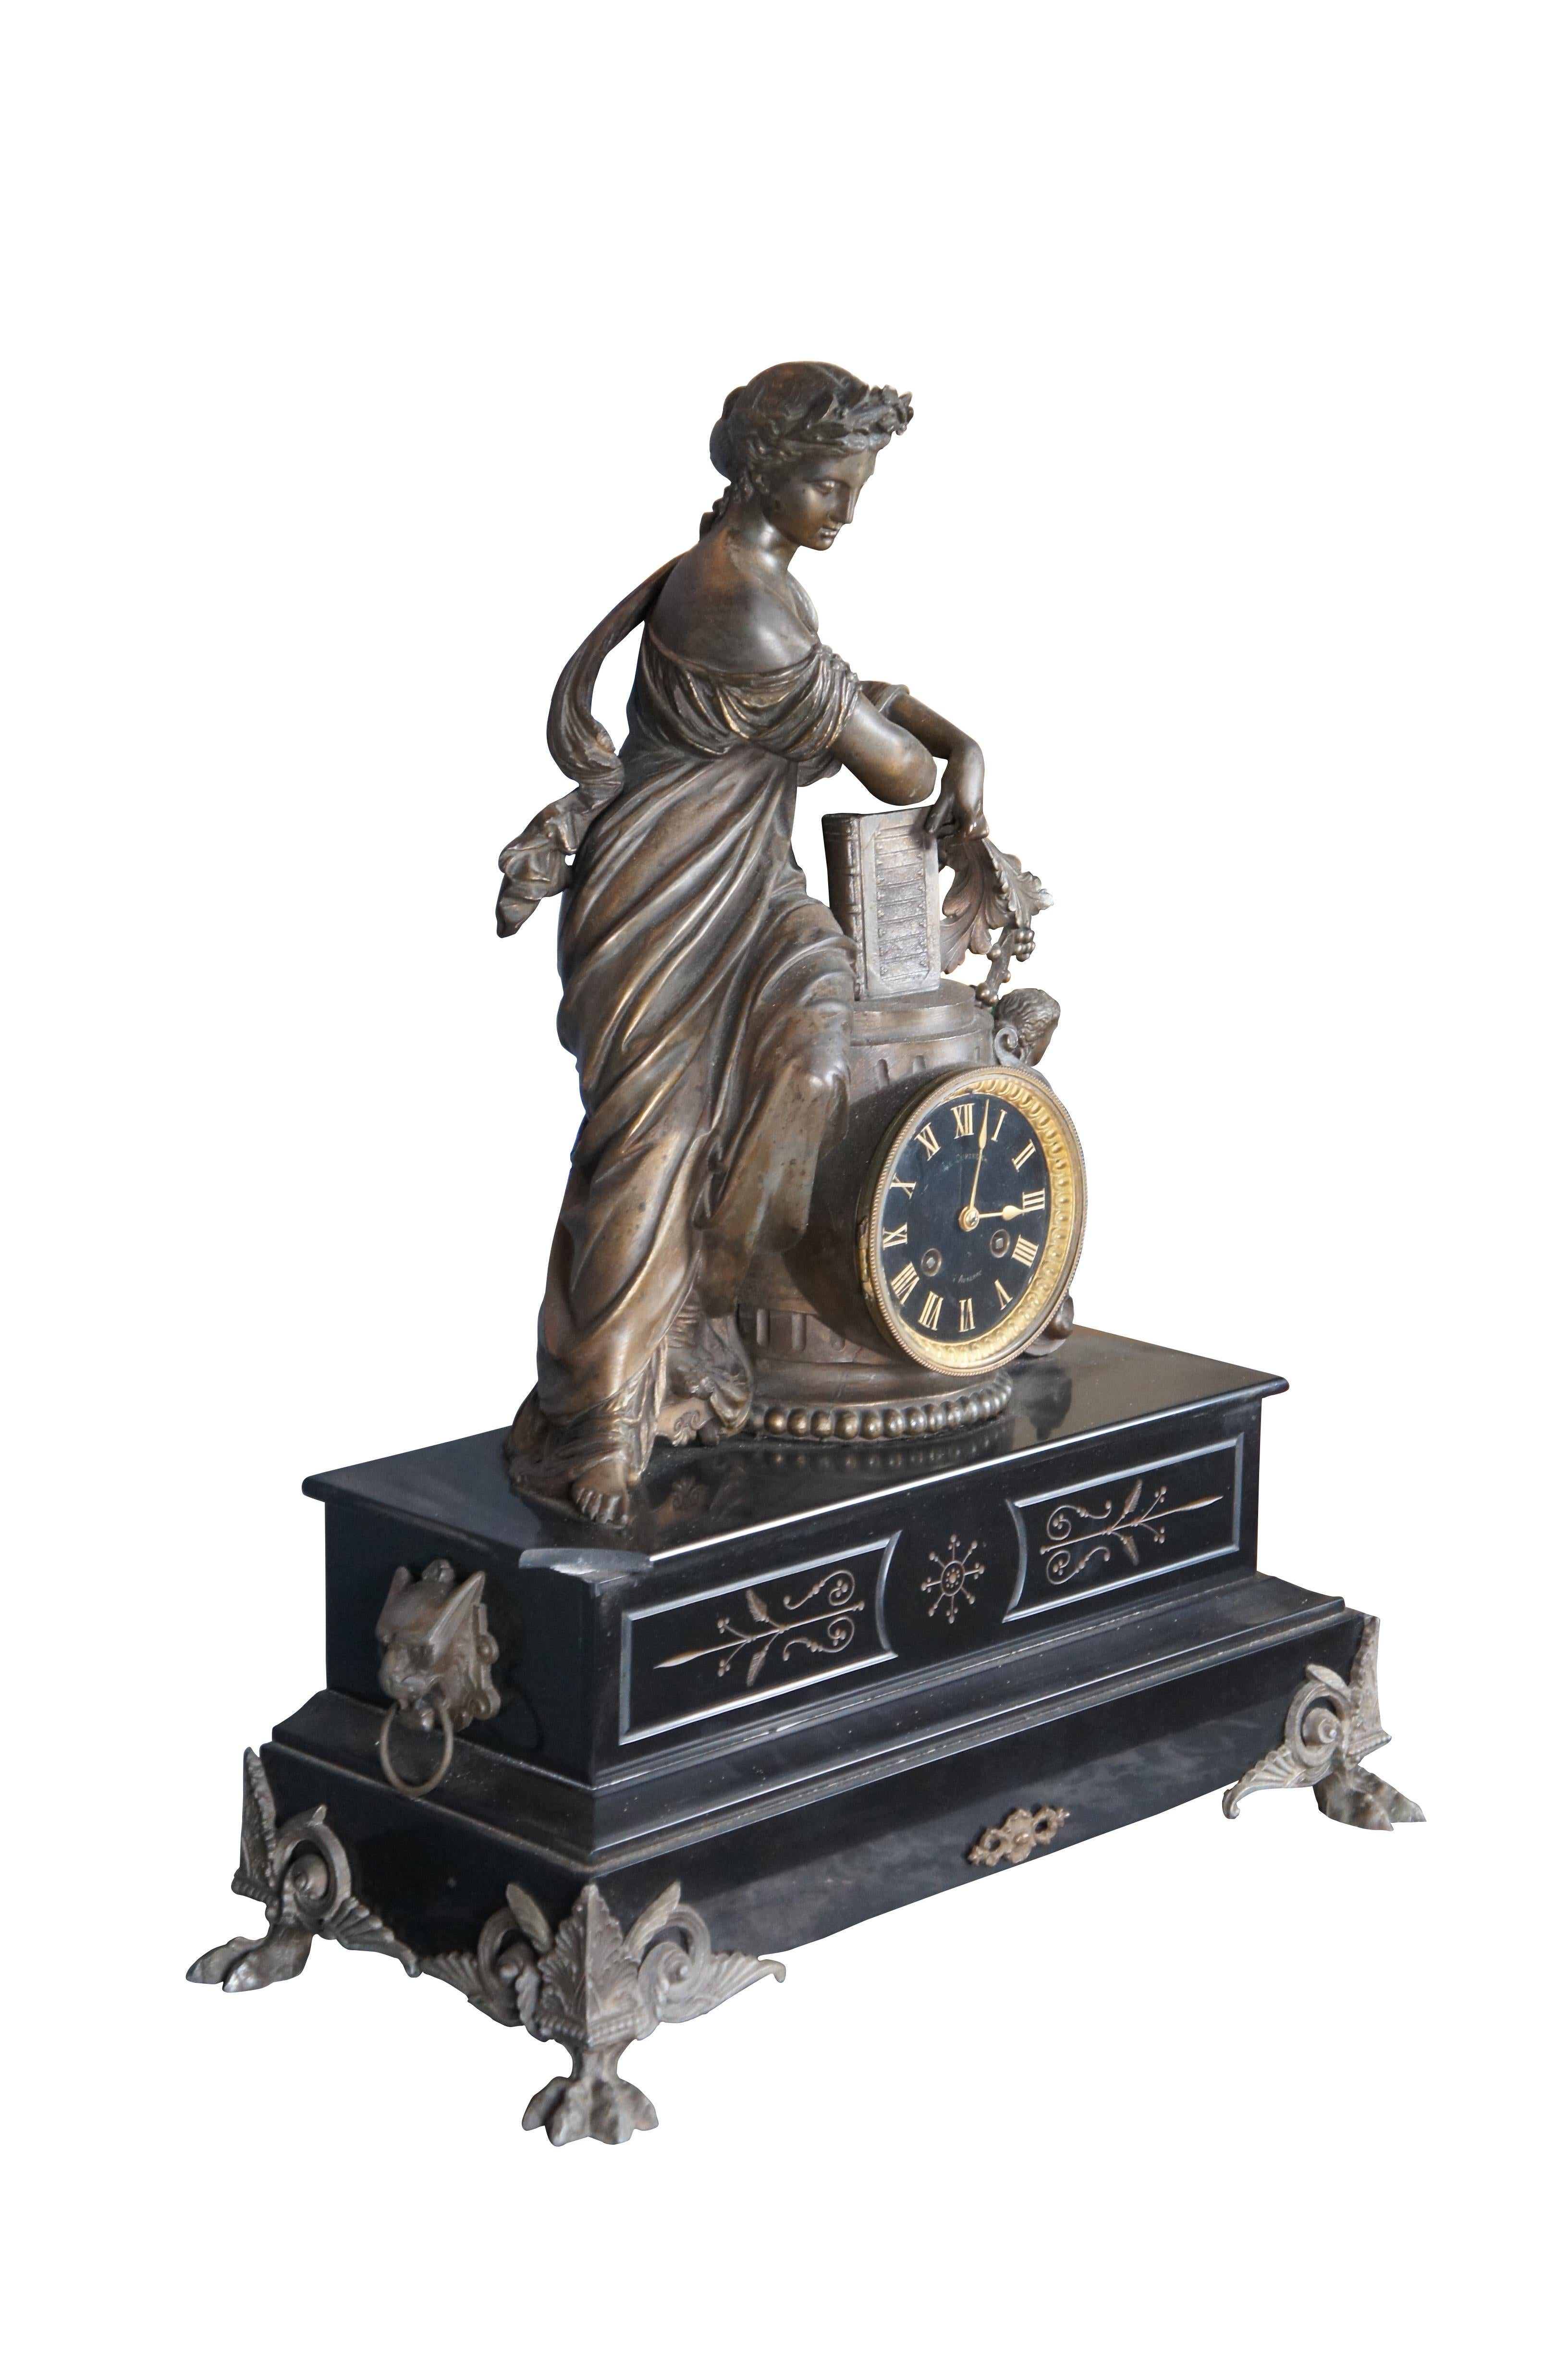 A spectacular French Mantel Clock with dated works marked 1858. The works Are Marked V & E with a Figured Bee between the two letters. The bell is inscribed Moreau, so the Clio figure may have been done By Auguste Moreau. The figure is Clio, the